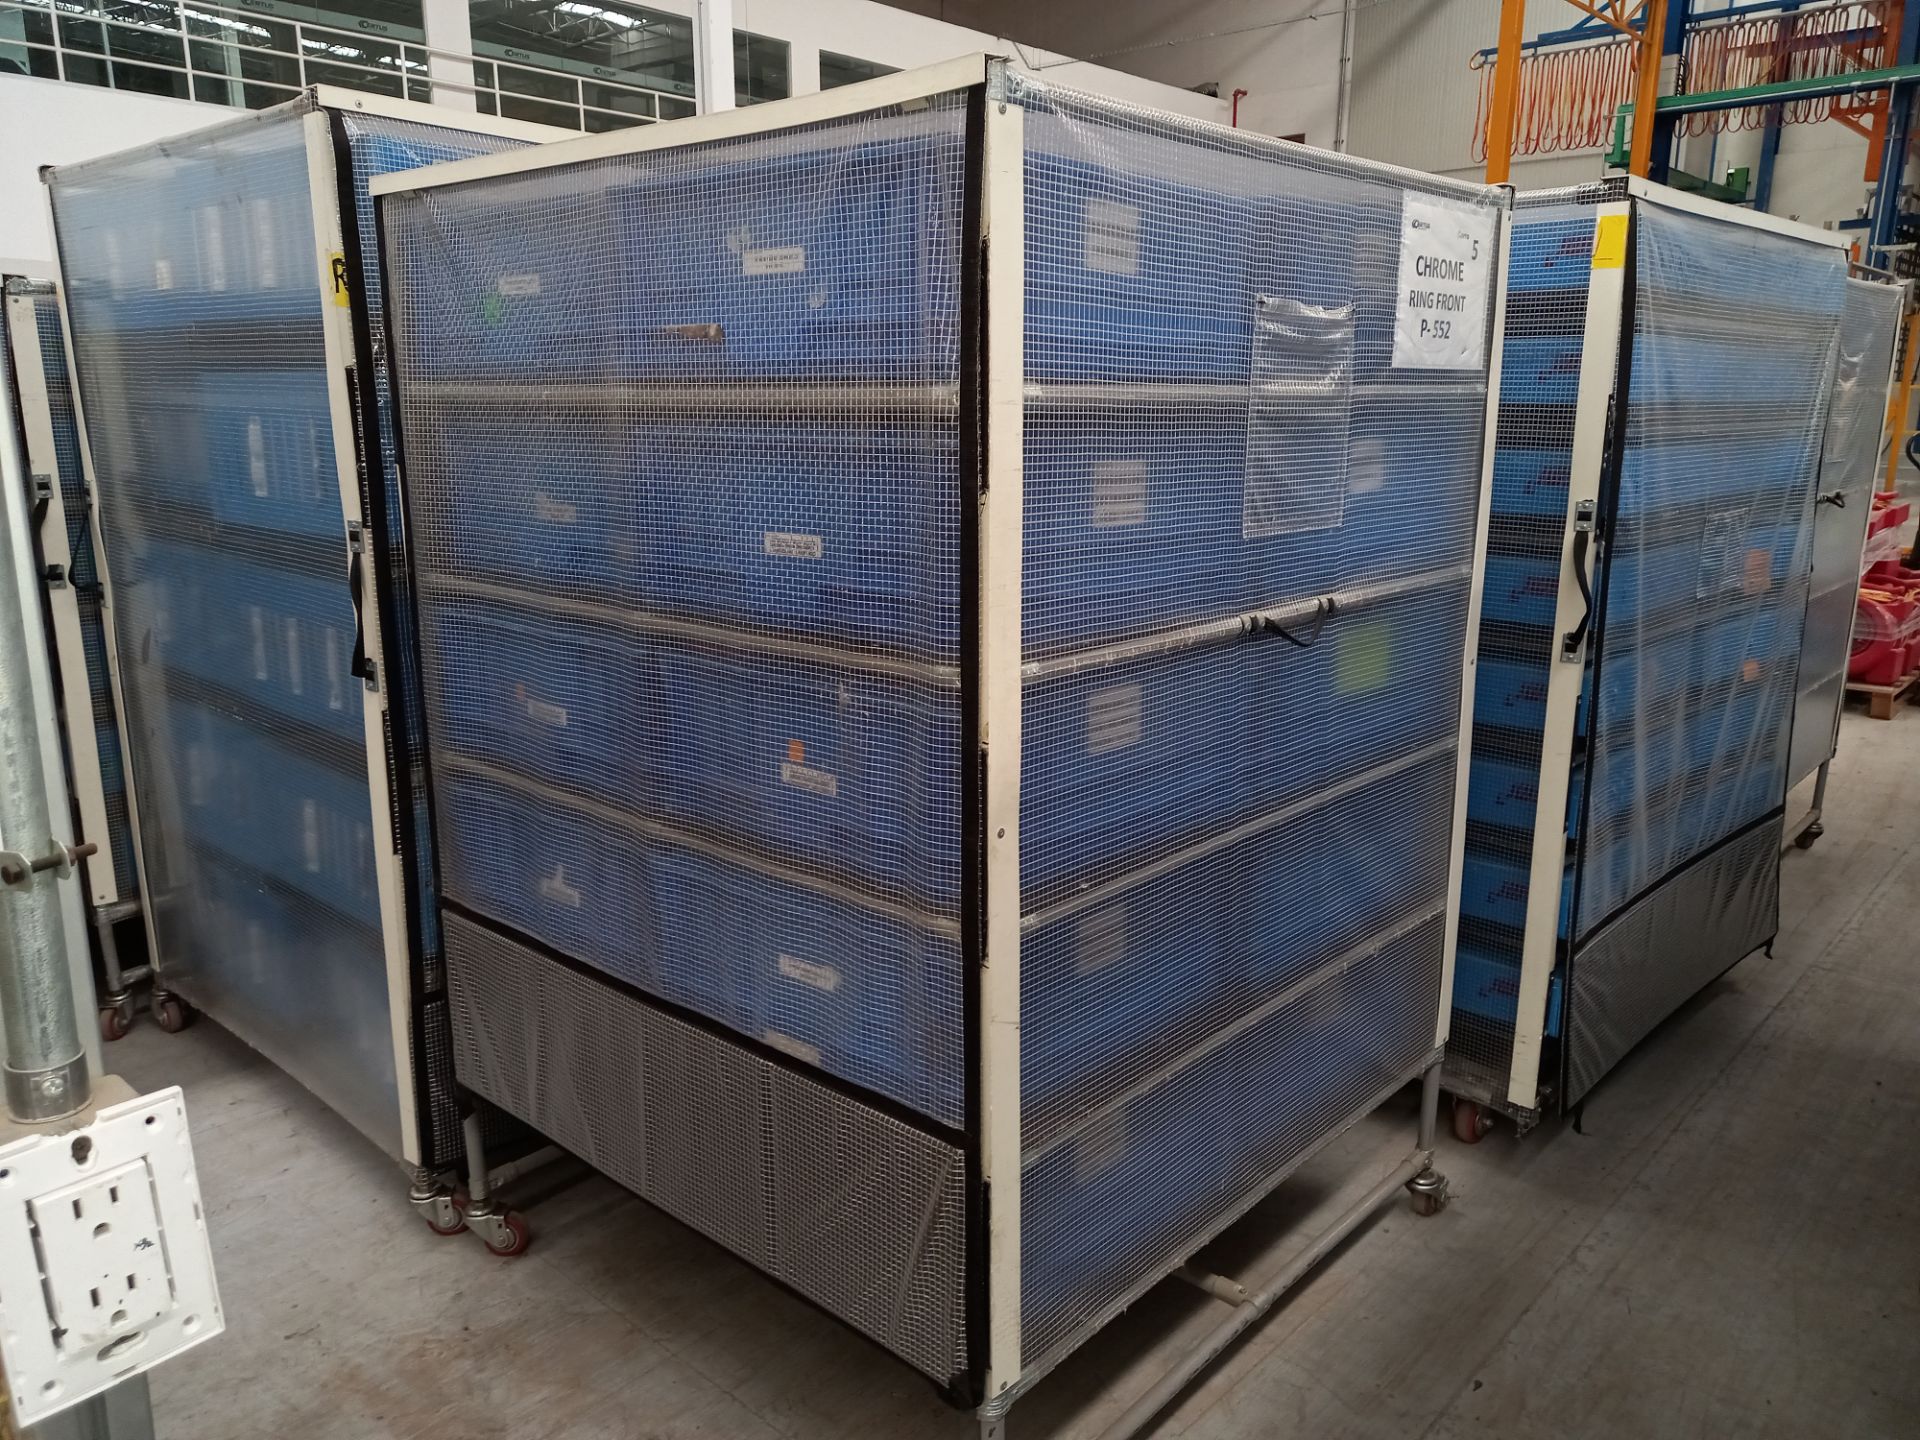 Lot of (56) Assorted Mobile Storage Carts, Different Sizes - Image 5 of 9